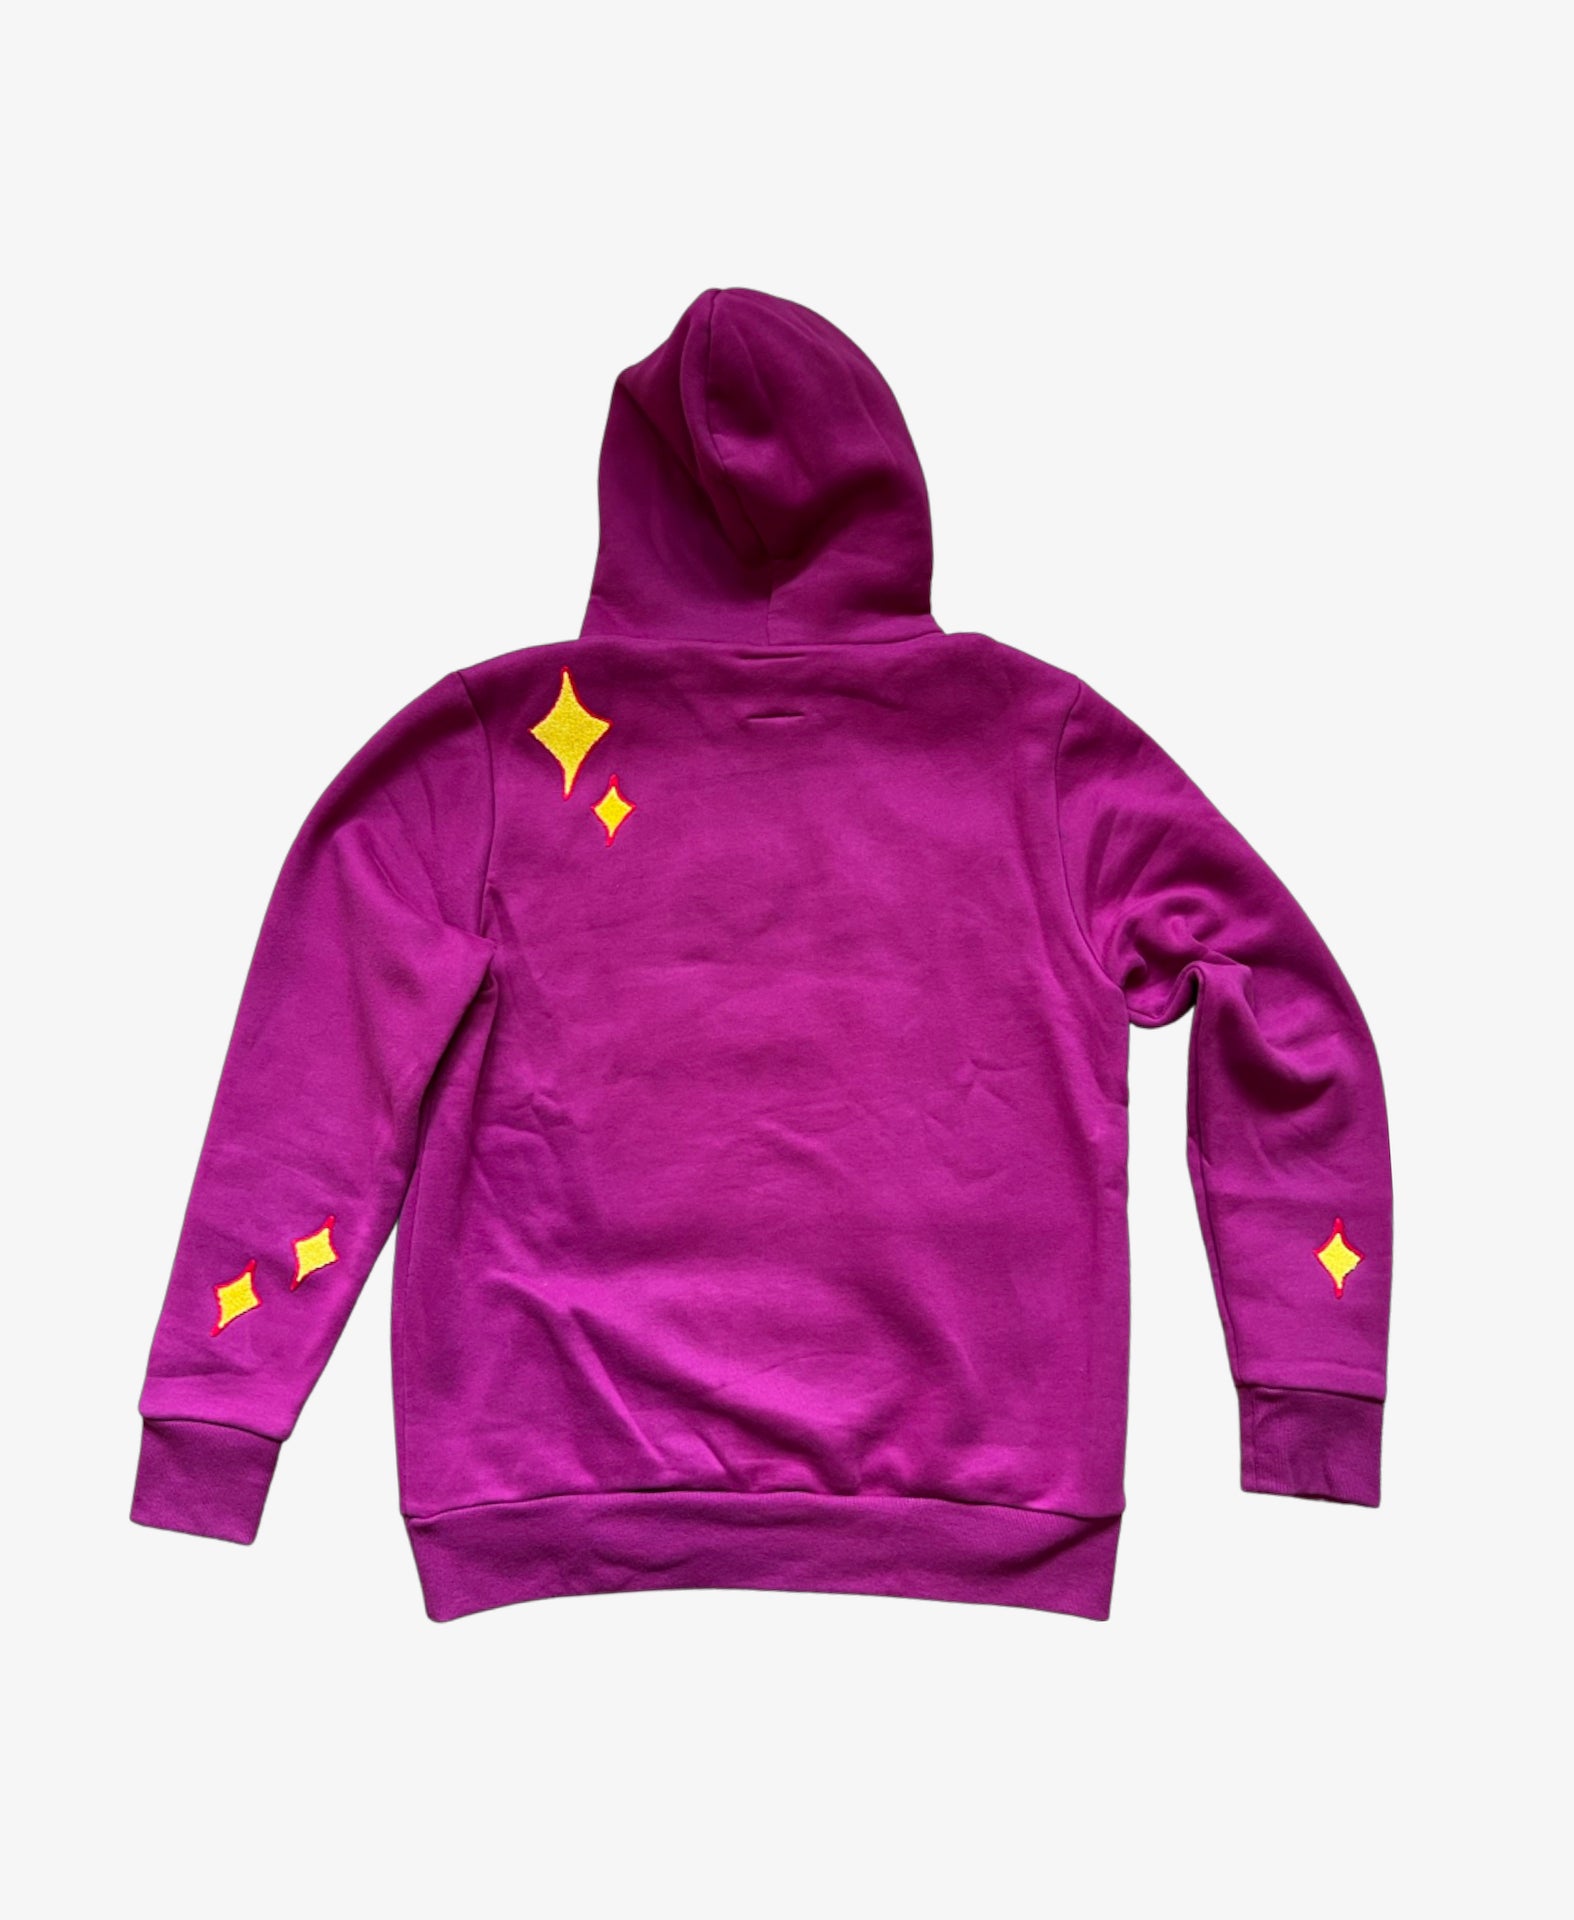 Emotional Security - Purple and Yellow Hoodie